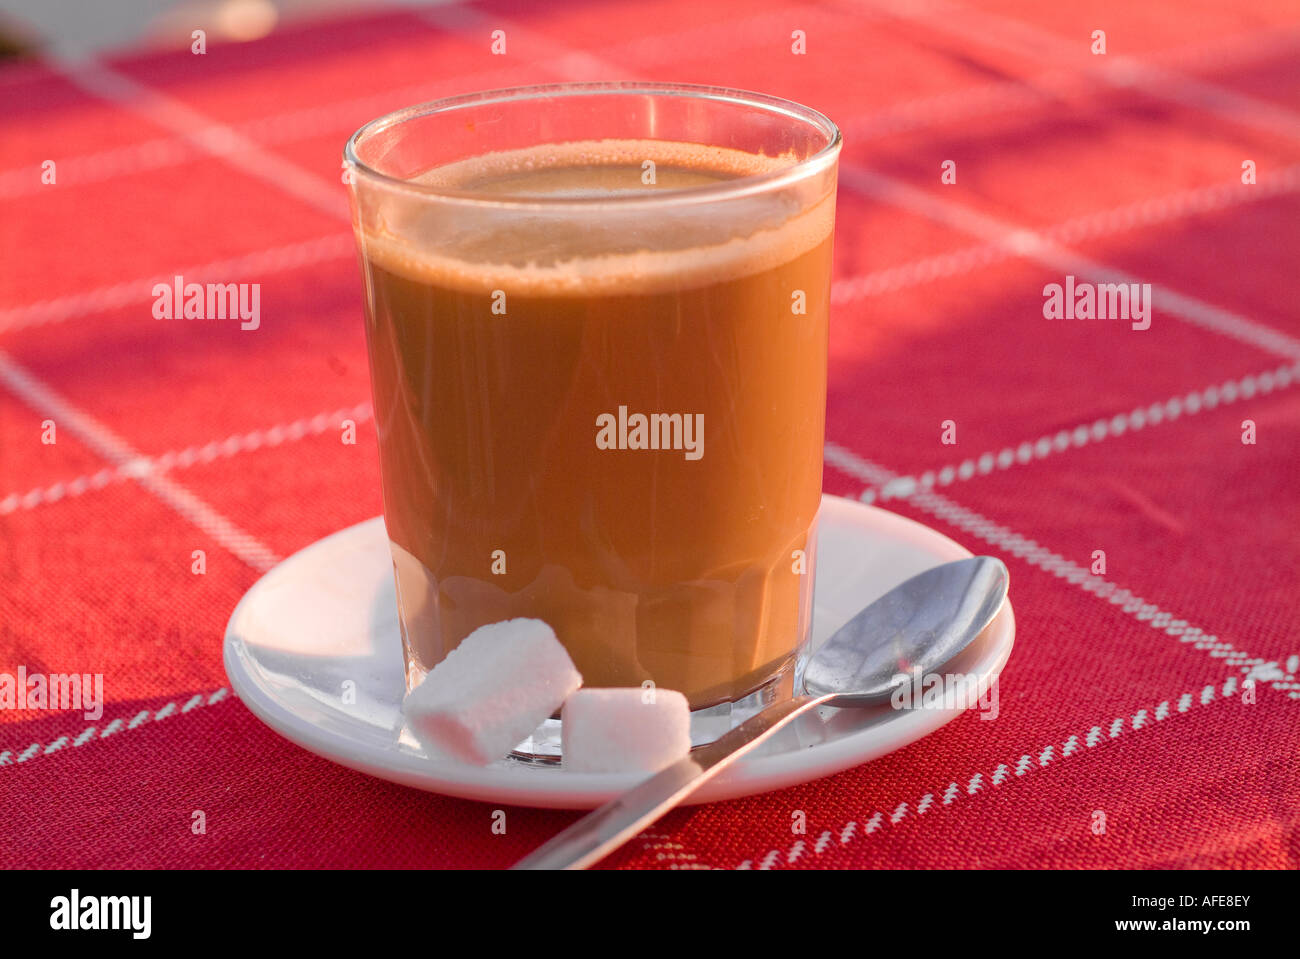 Cafe latte in clear glass cup on red tablecloth Stock Photo